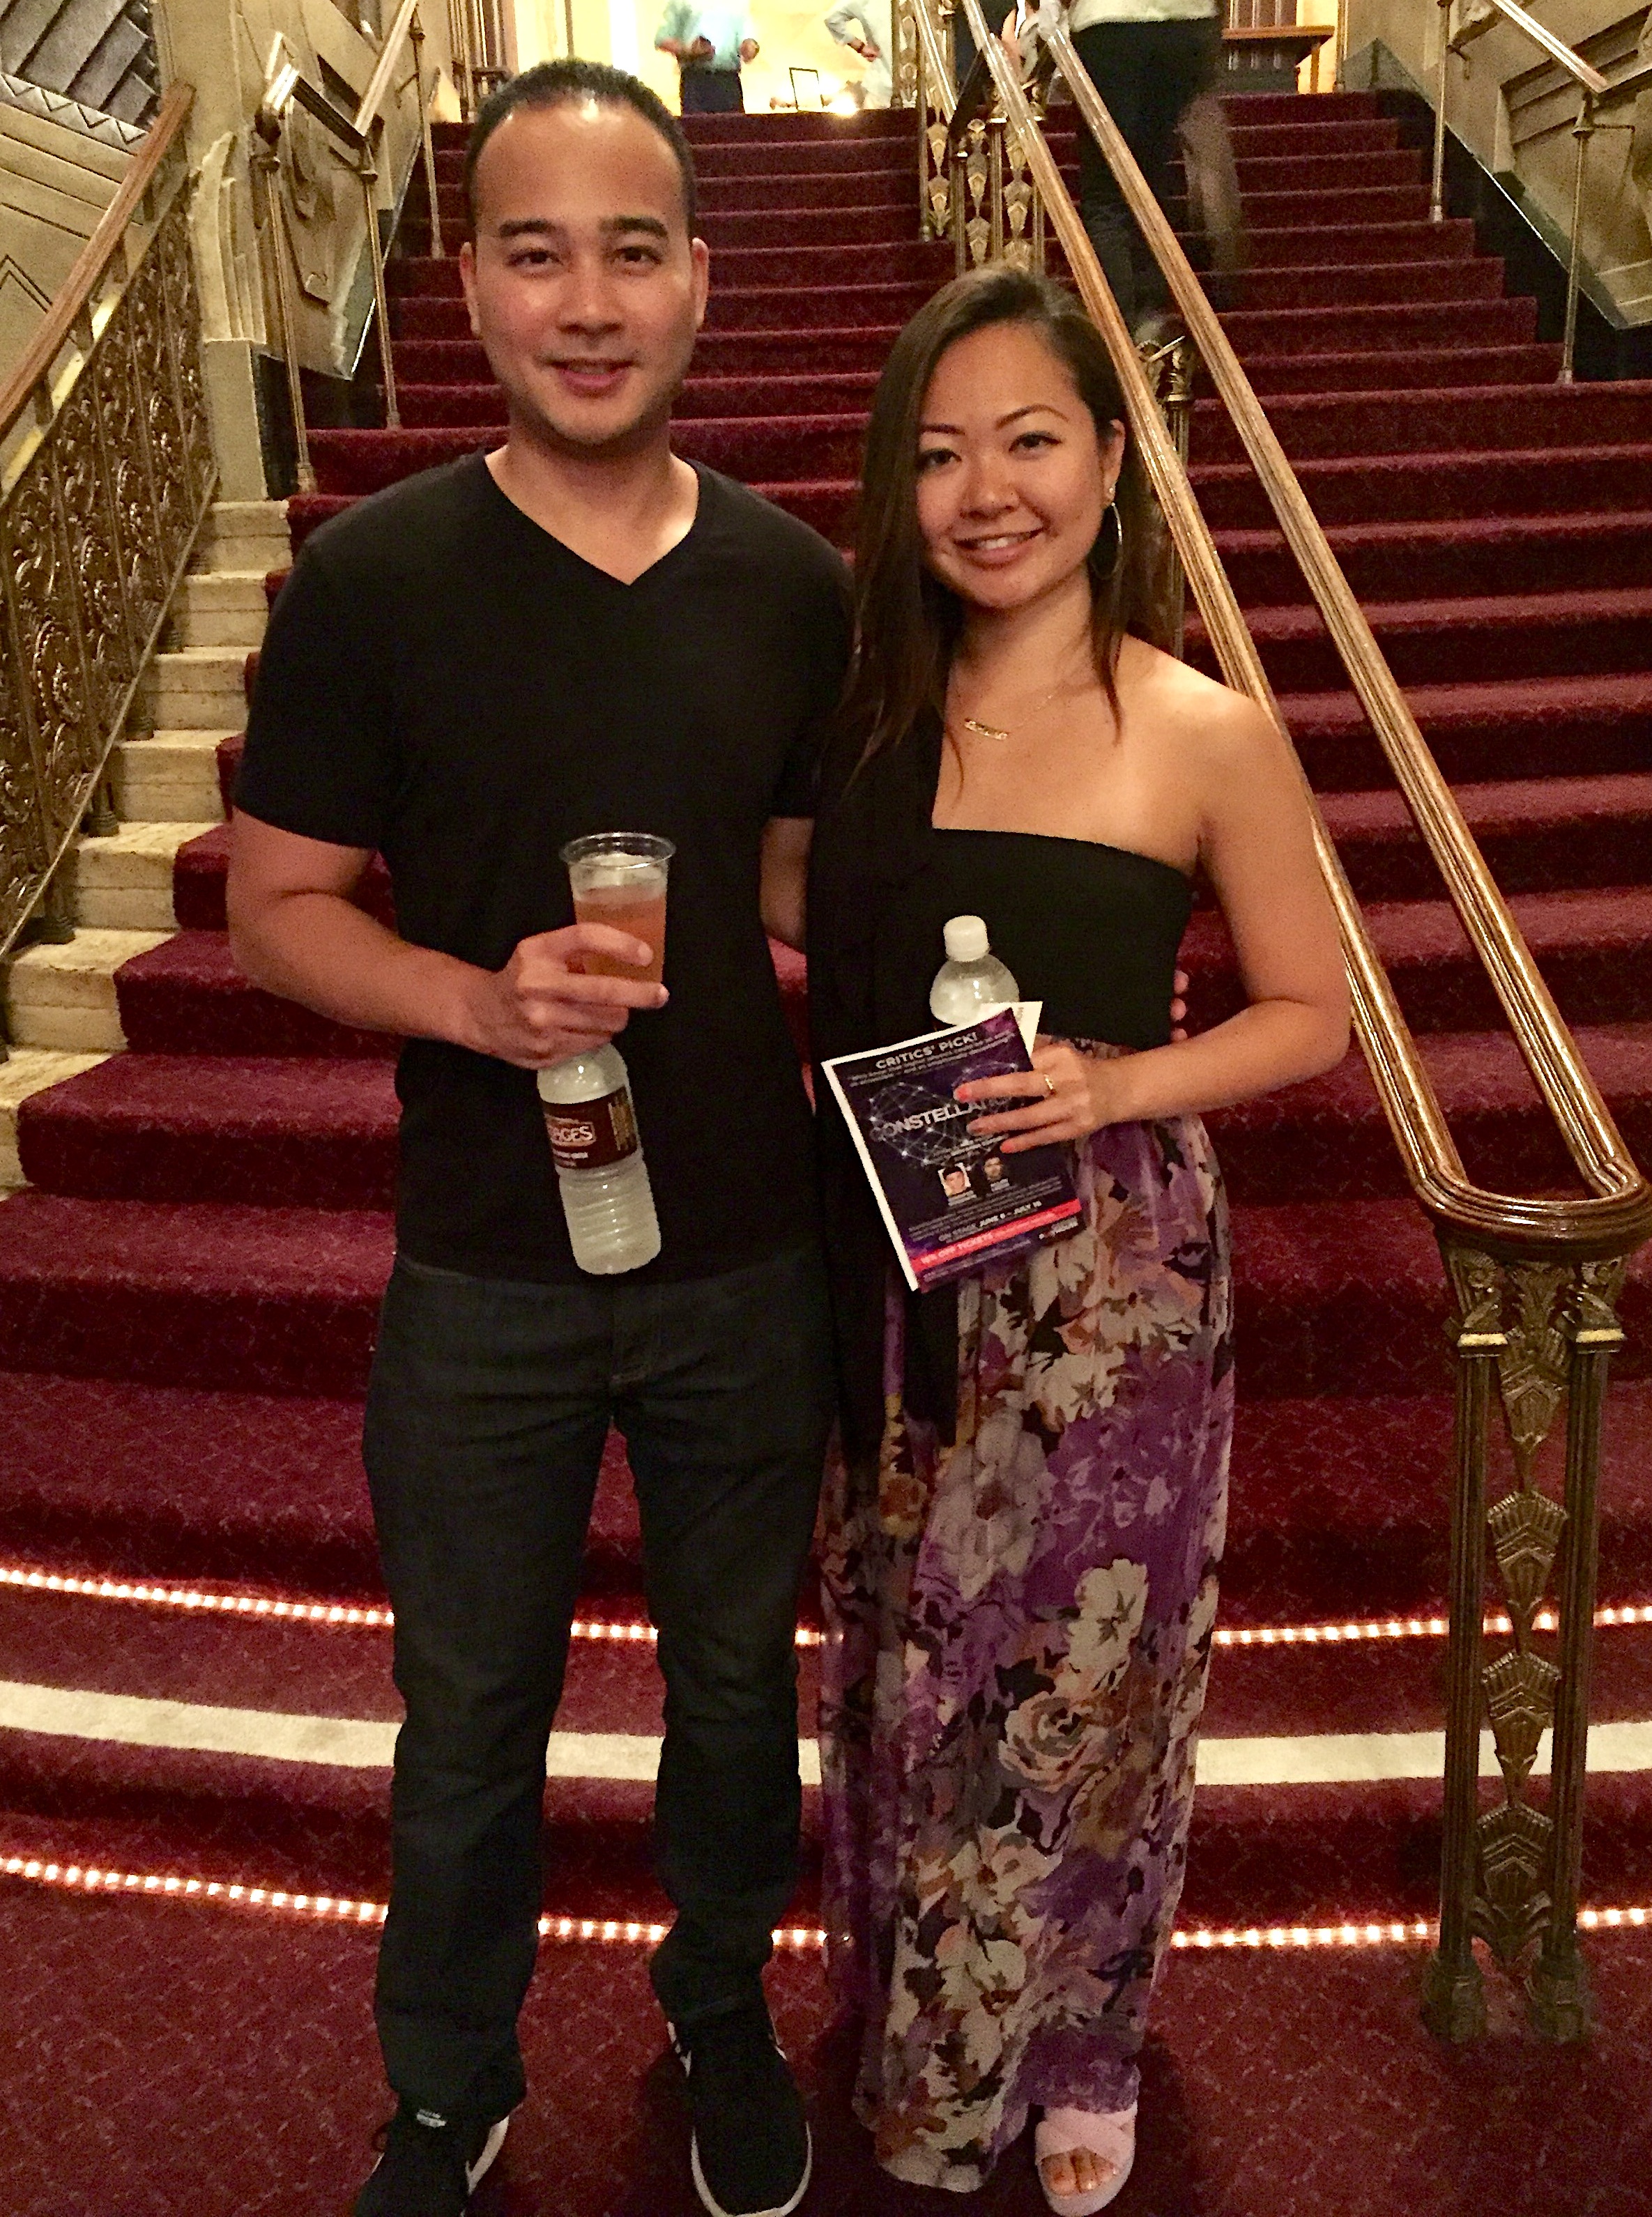 Devi Ohira Pantages Theatre Hollywood Book of Mormon Los Angeles.jpg